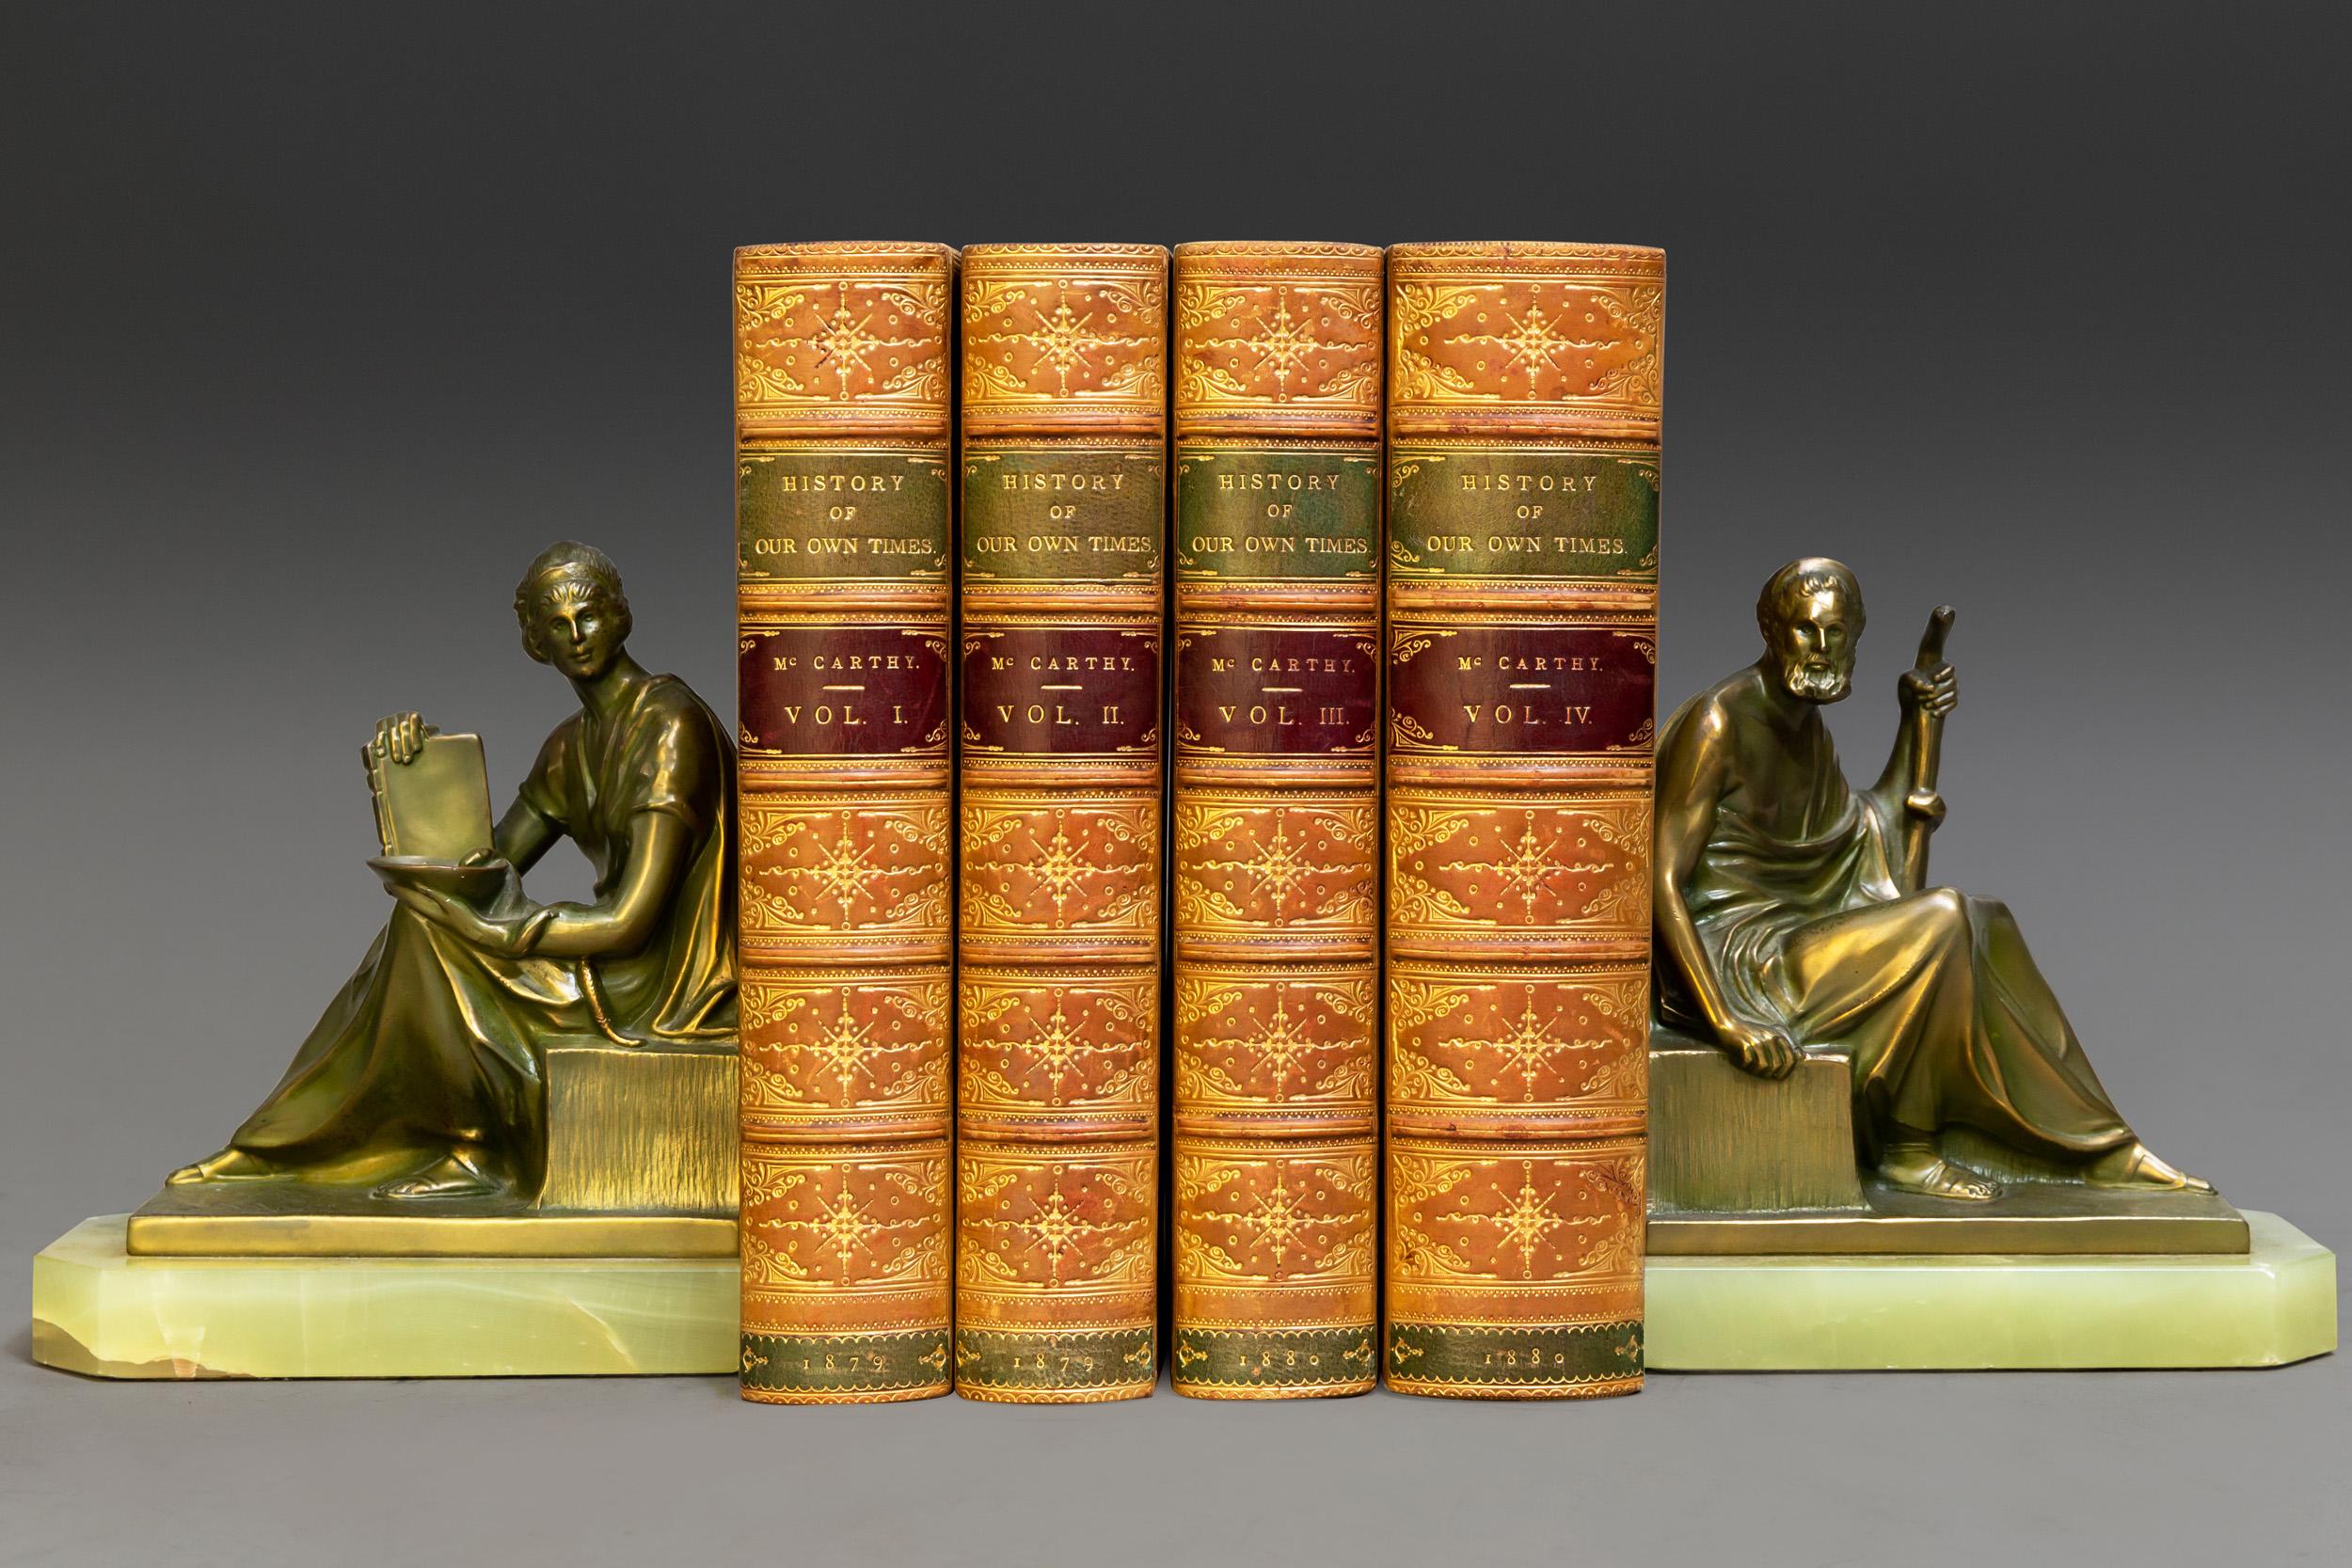 4 Volumes

From The Accession Of Queen Victoria To The Berlin Congress. 

Bound in Full Tan Calf By Zaehnsdorf, Marbled Edges, Raised Bands, Ornate Gilt On Spines.

Published: London: Chatto & Windus 1879.